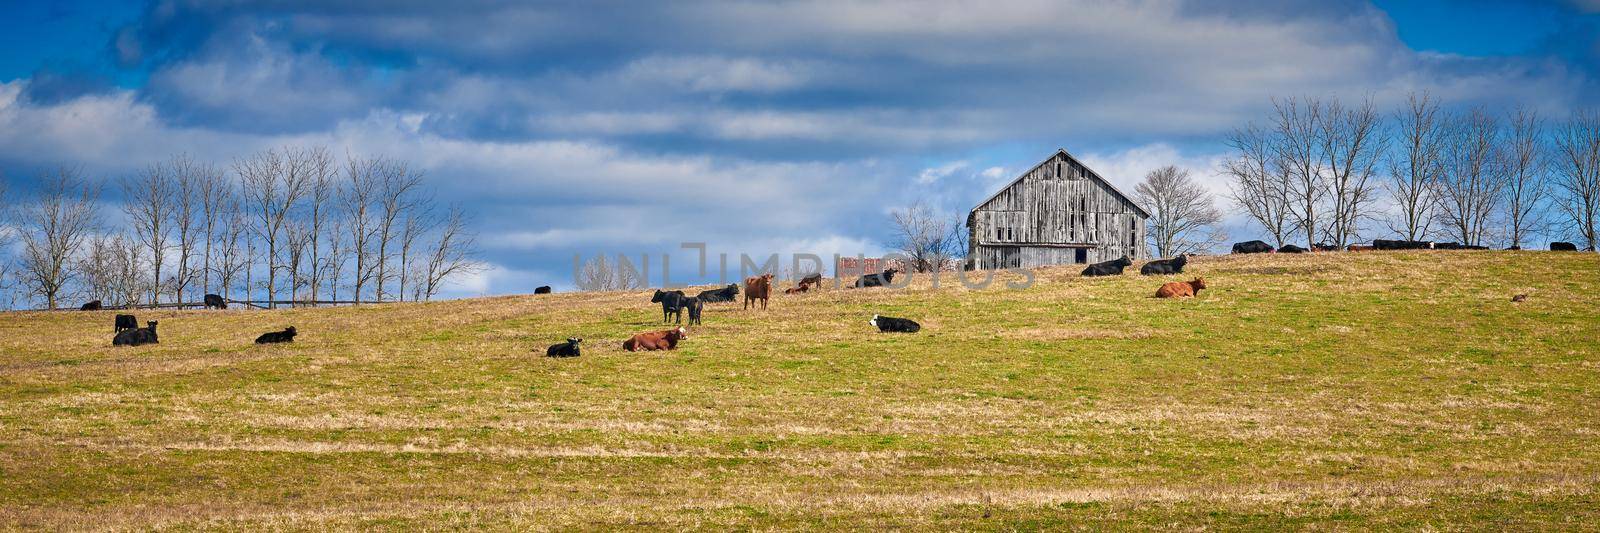 Cows laying in a field by a tobacco barn, Central Kentucky. by patrickstock